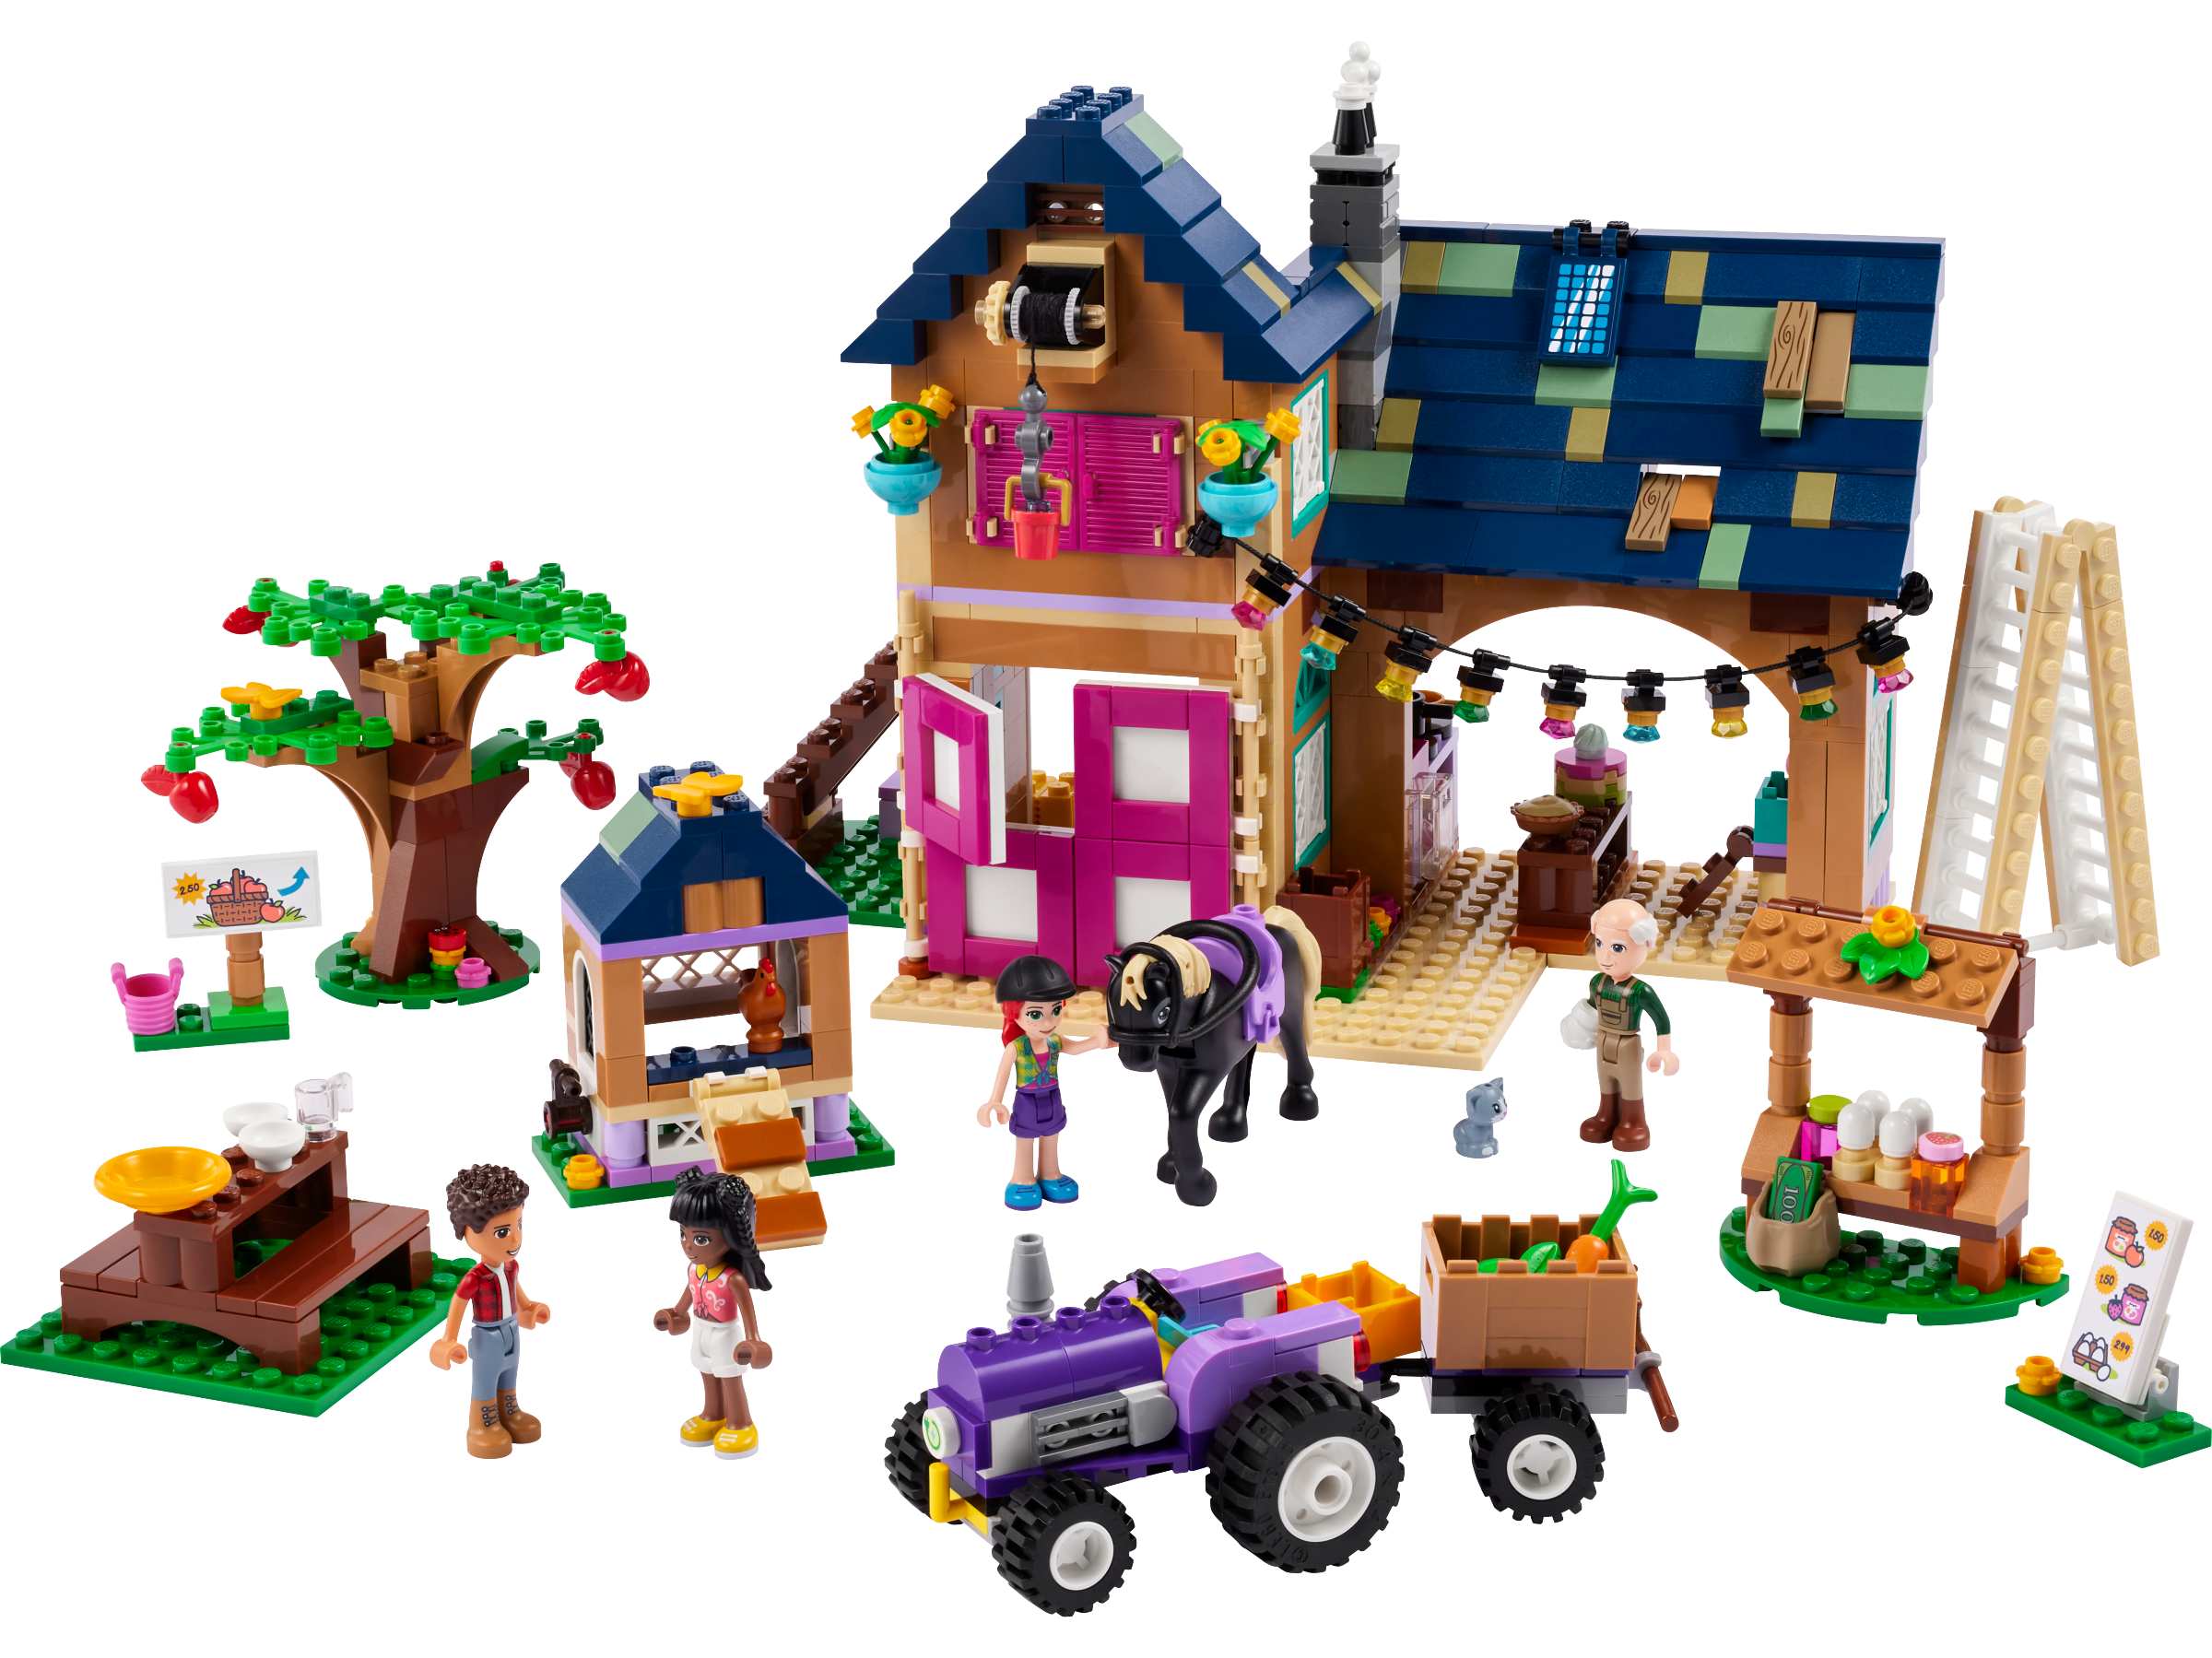 LEGO® Friends Introducing a new world of friends | Official LEGO® US